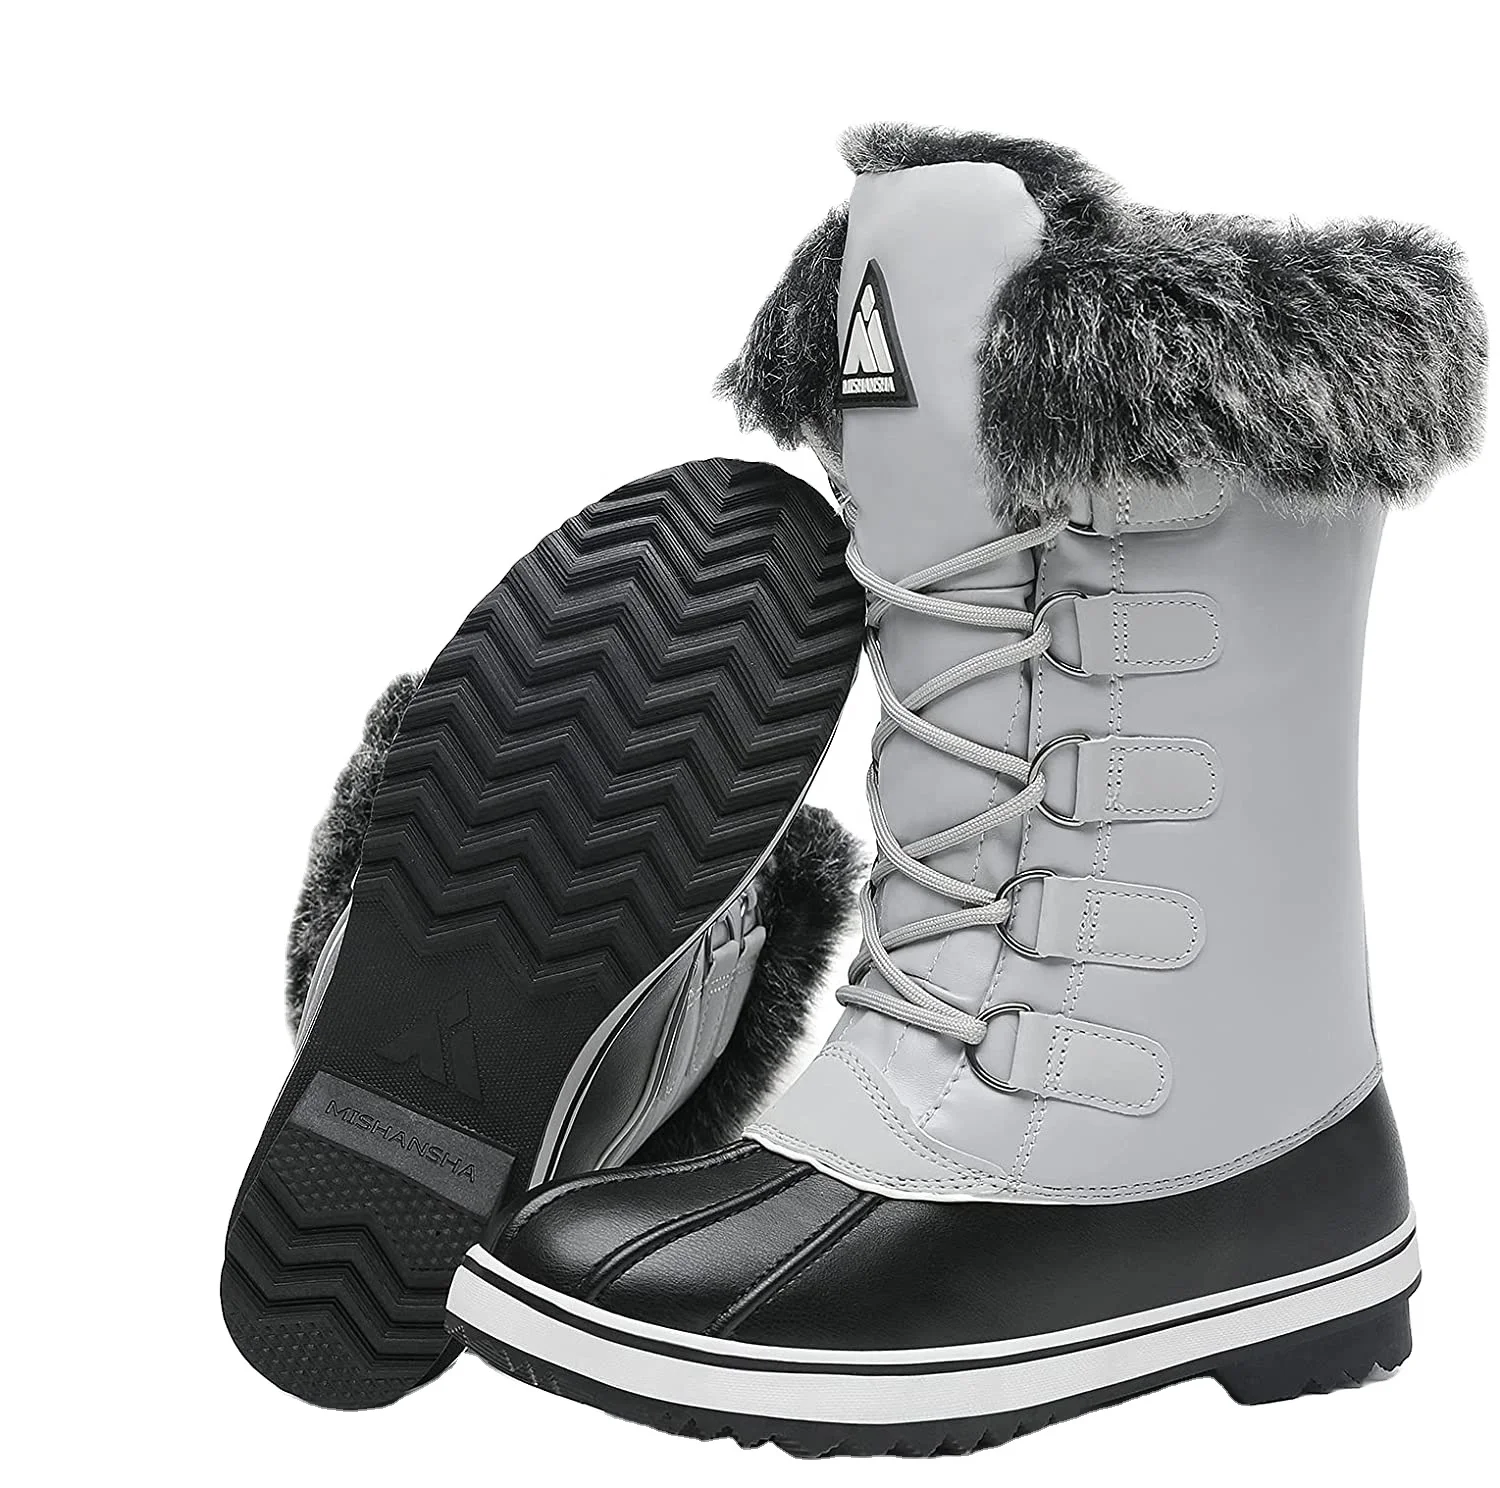 

Soft and Thick High Top Boots Walking Style Shoes Snow Boots With Non-slip TPR Outsole, Multi colors